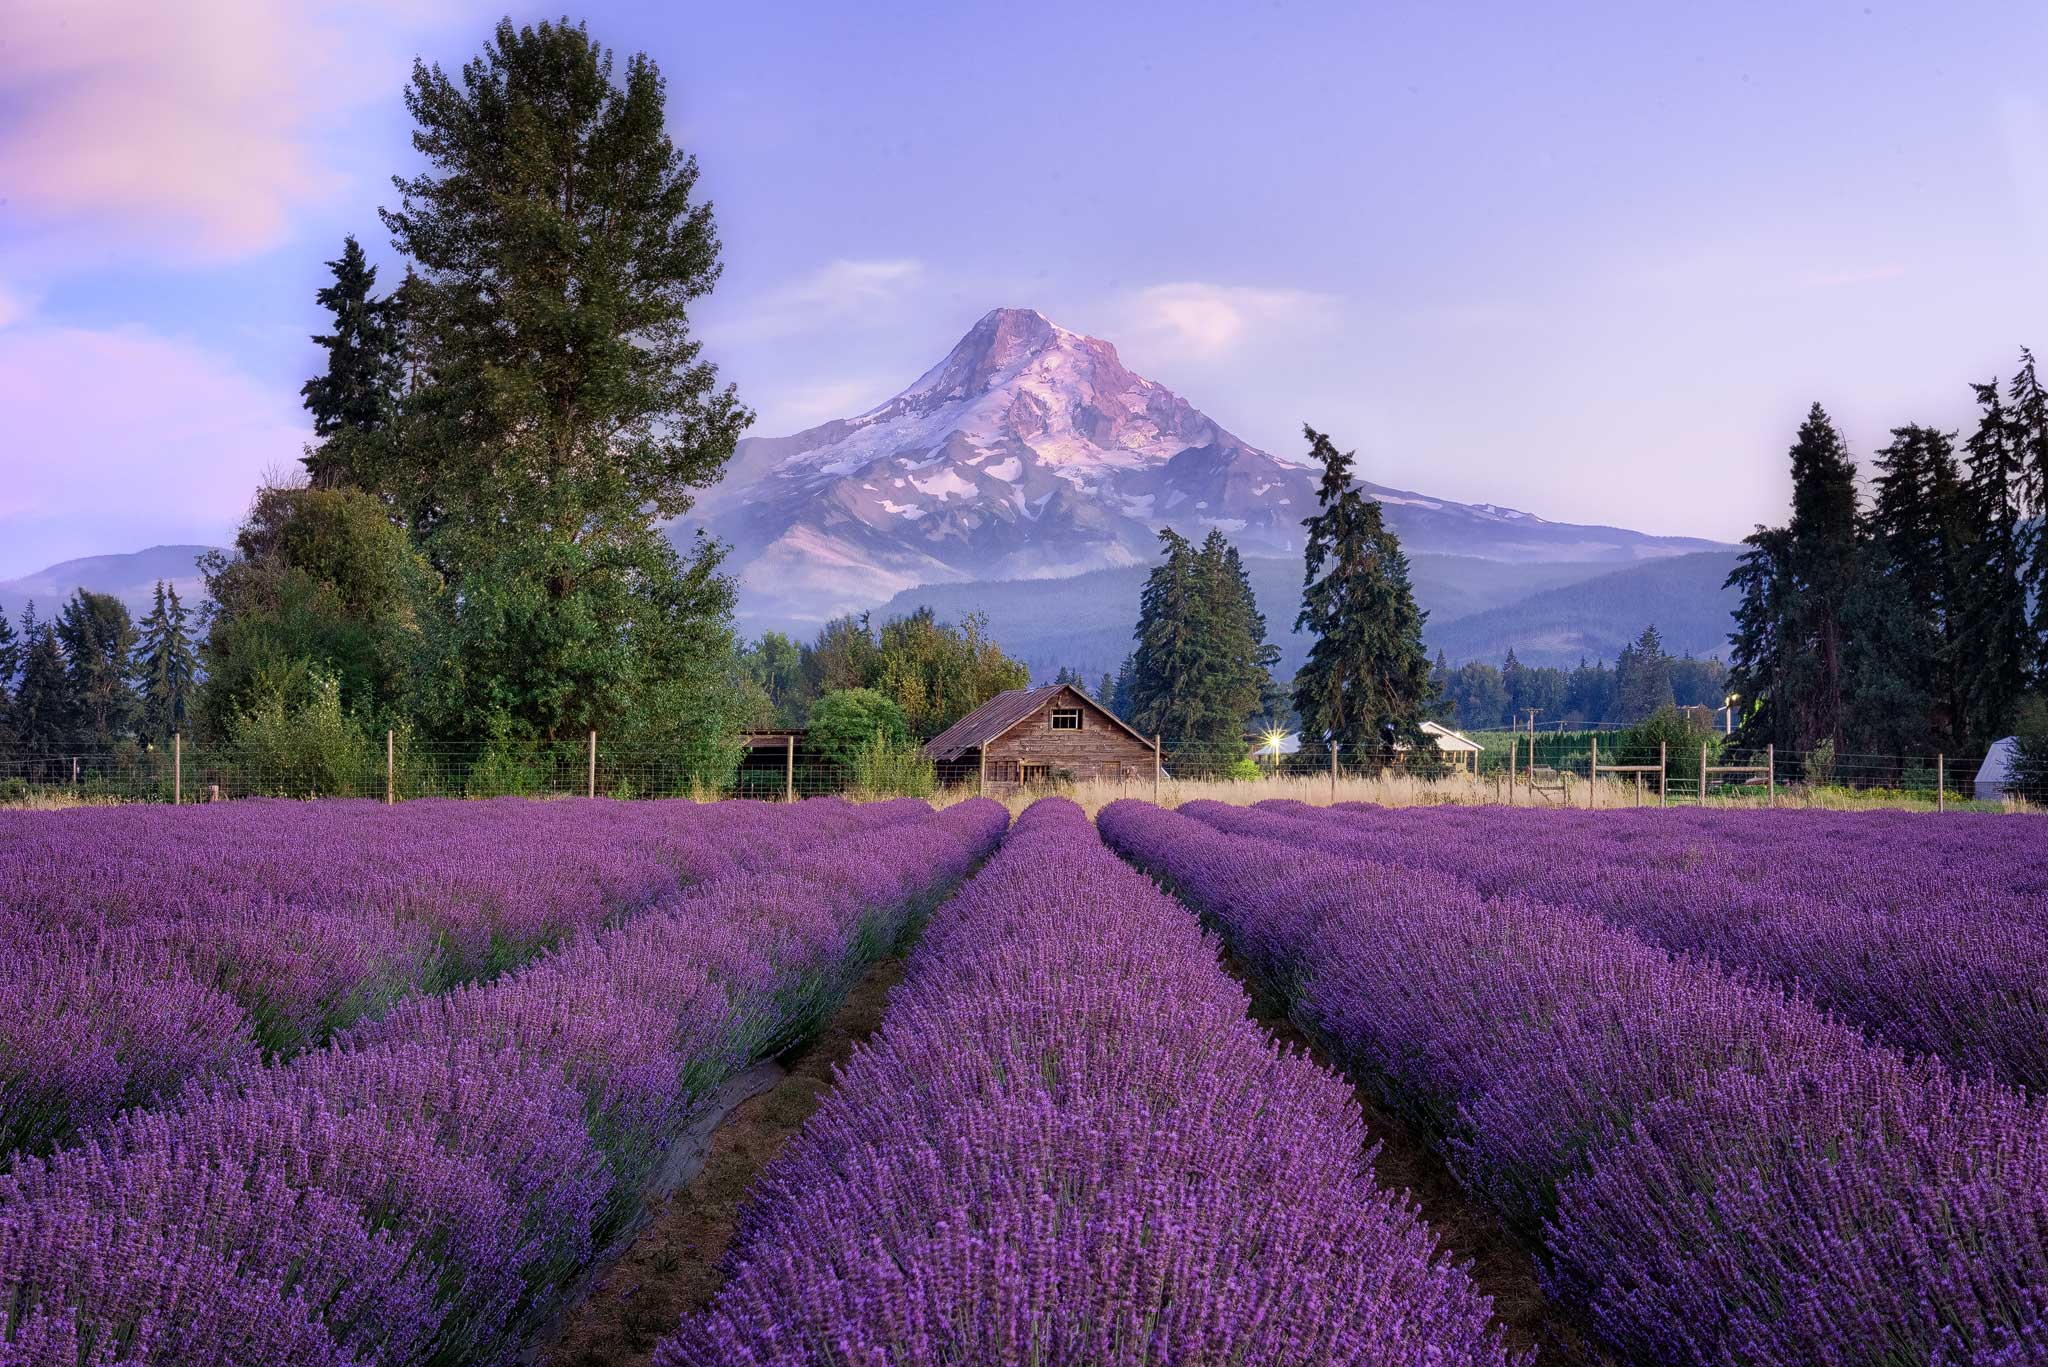 Purple Mountains Majesty - Mount Hood and Lavender Field Photo Print